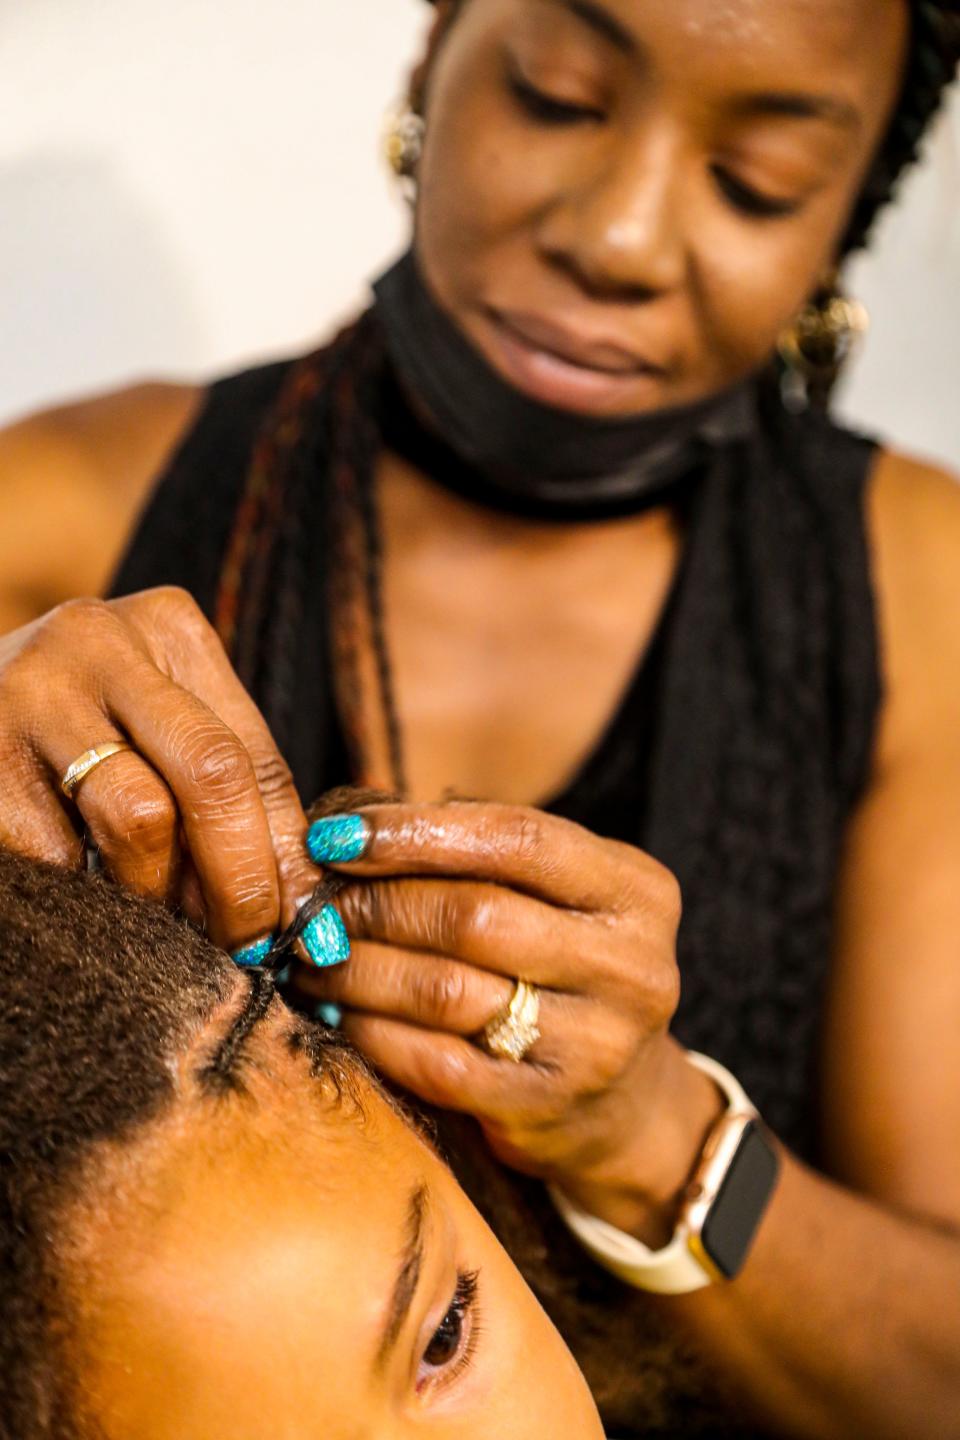 Stylist Charrell Brown works on kids braids on Wednesday, July 6 2022. She braided in cornrows and box braids. Brown is a stylist at Monique Smith's shop Beauty, Braids and Beyond in Fort Myers, Florida.